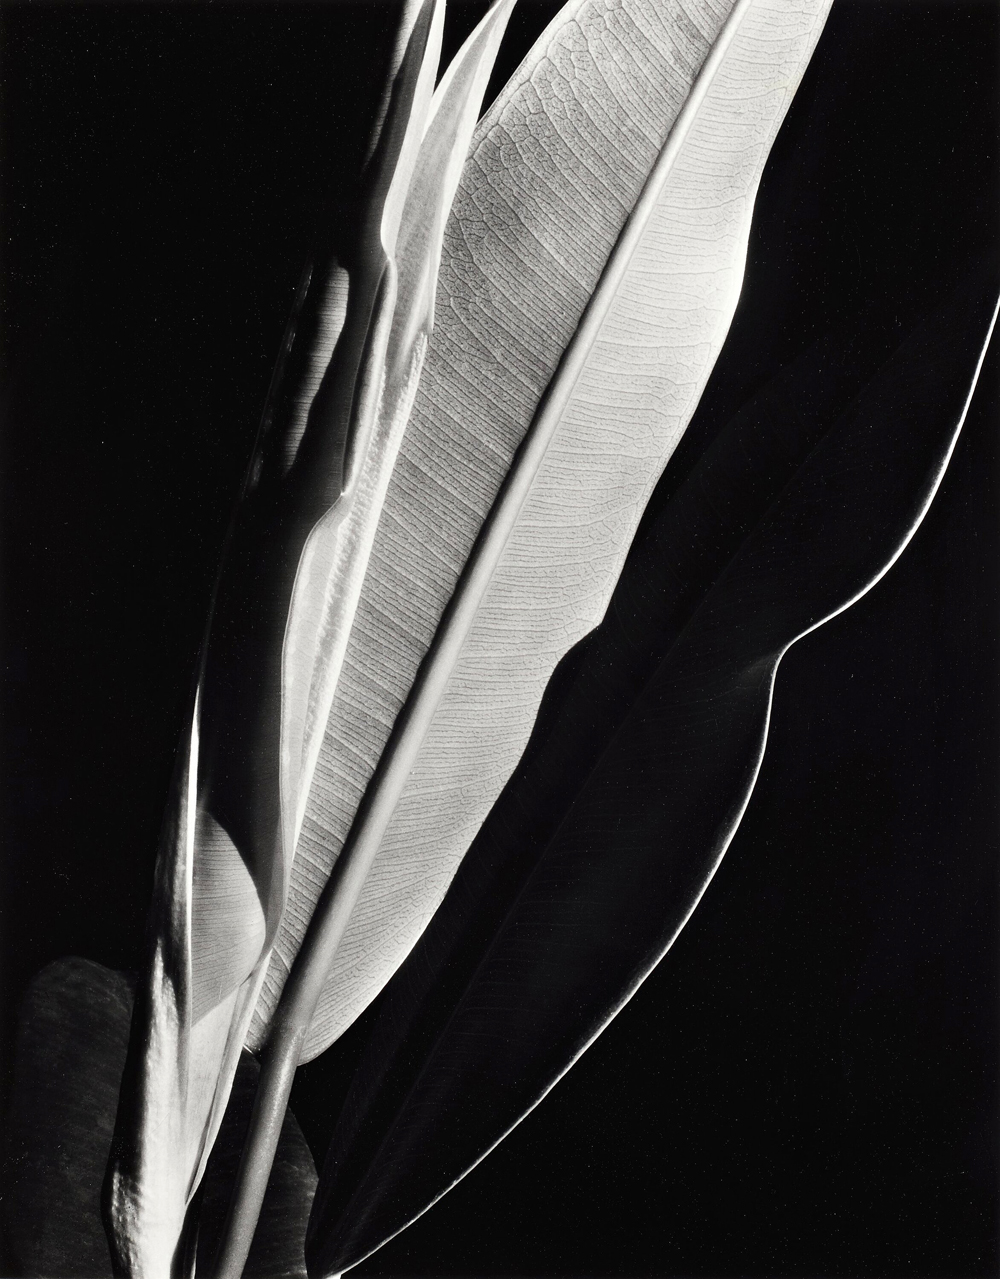 Imogen Cunningham, Rubber Plant, 1929, signed gelatin silver print, 14 x 11 inches (SOLD)